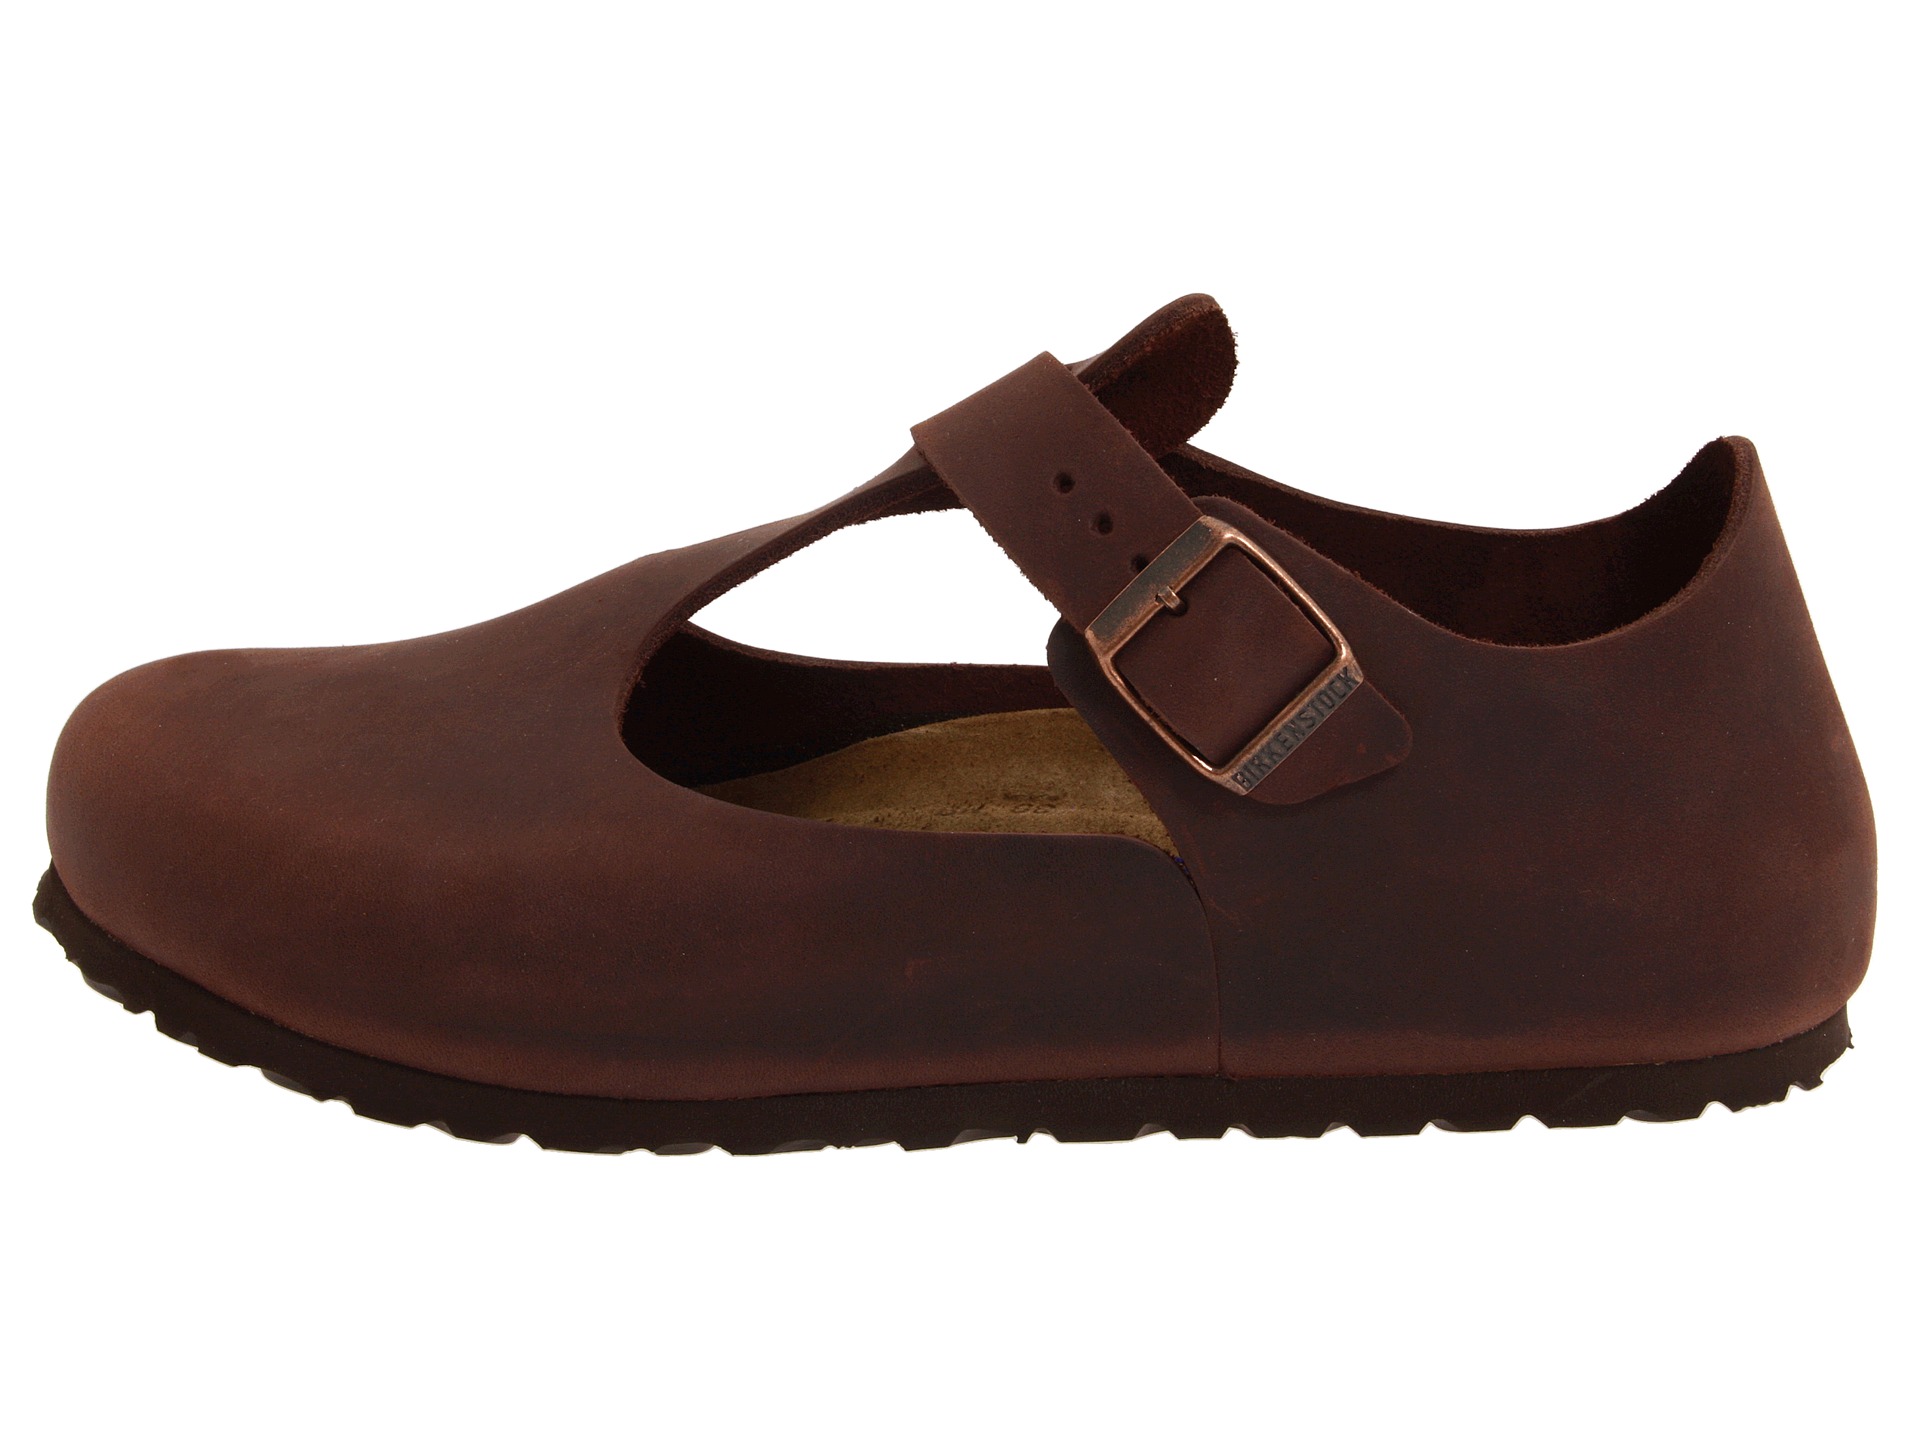 Birkenstock Paris Soft Footbed, Shoes | Shipped Free at Zappos